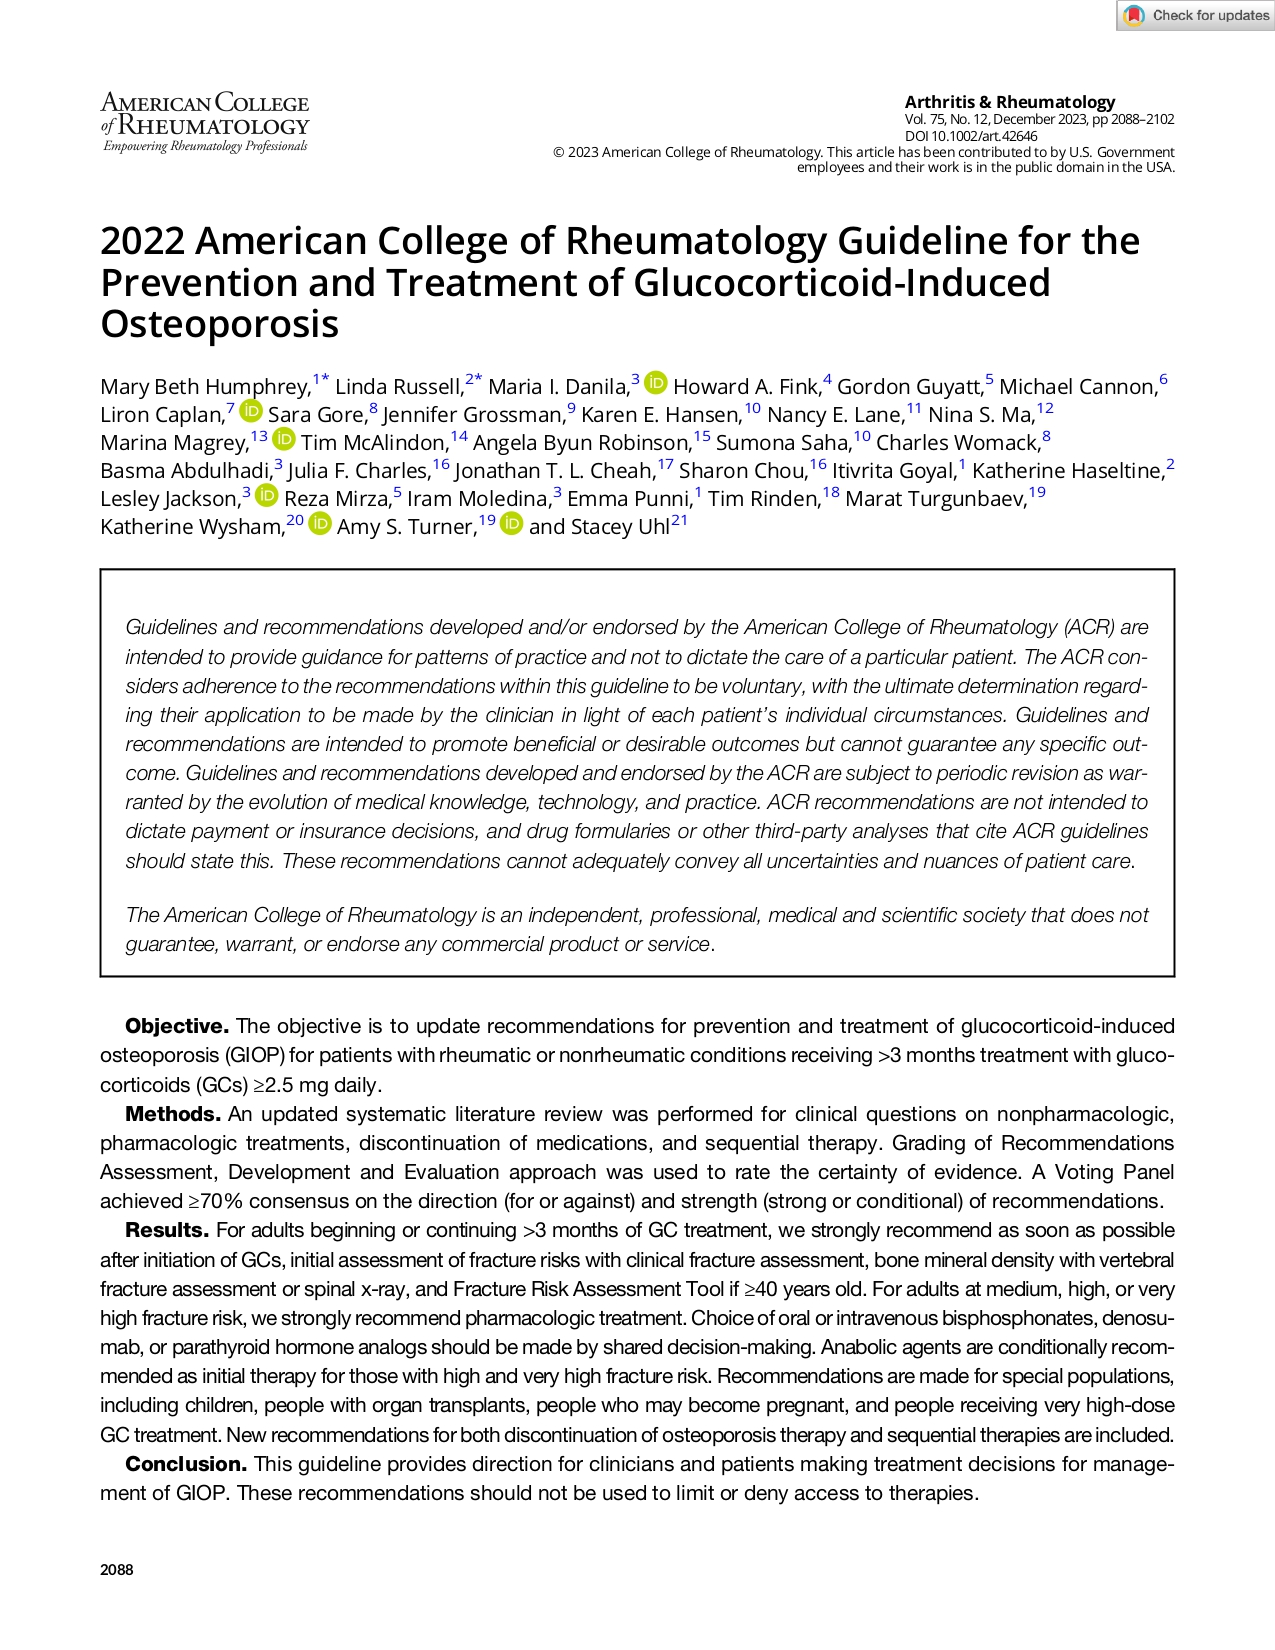 2022 American College of Rheumatology Guideline for the Prevention and Treatment of Glucocorticoid-Induced Osteoporosis (ACR  2022)